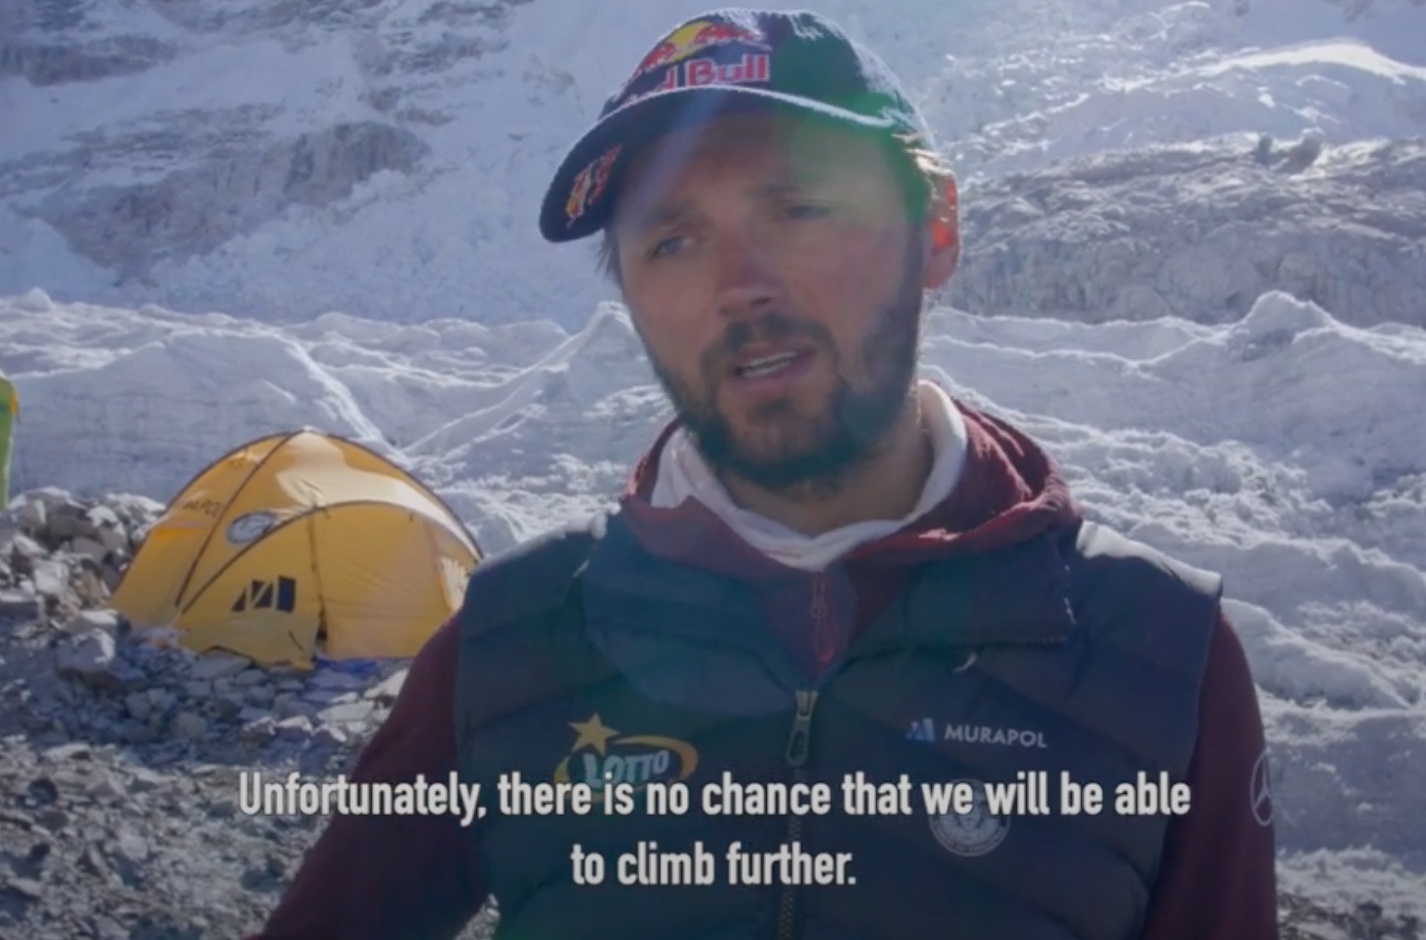 Man Planning To Ski Everest Ends Expedition Due To High Wind & Heavy Snow